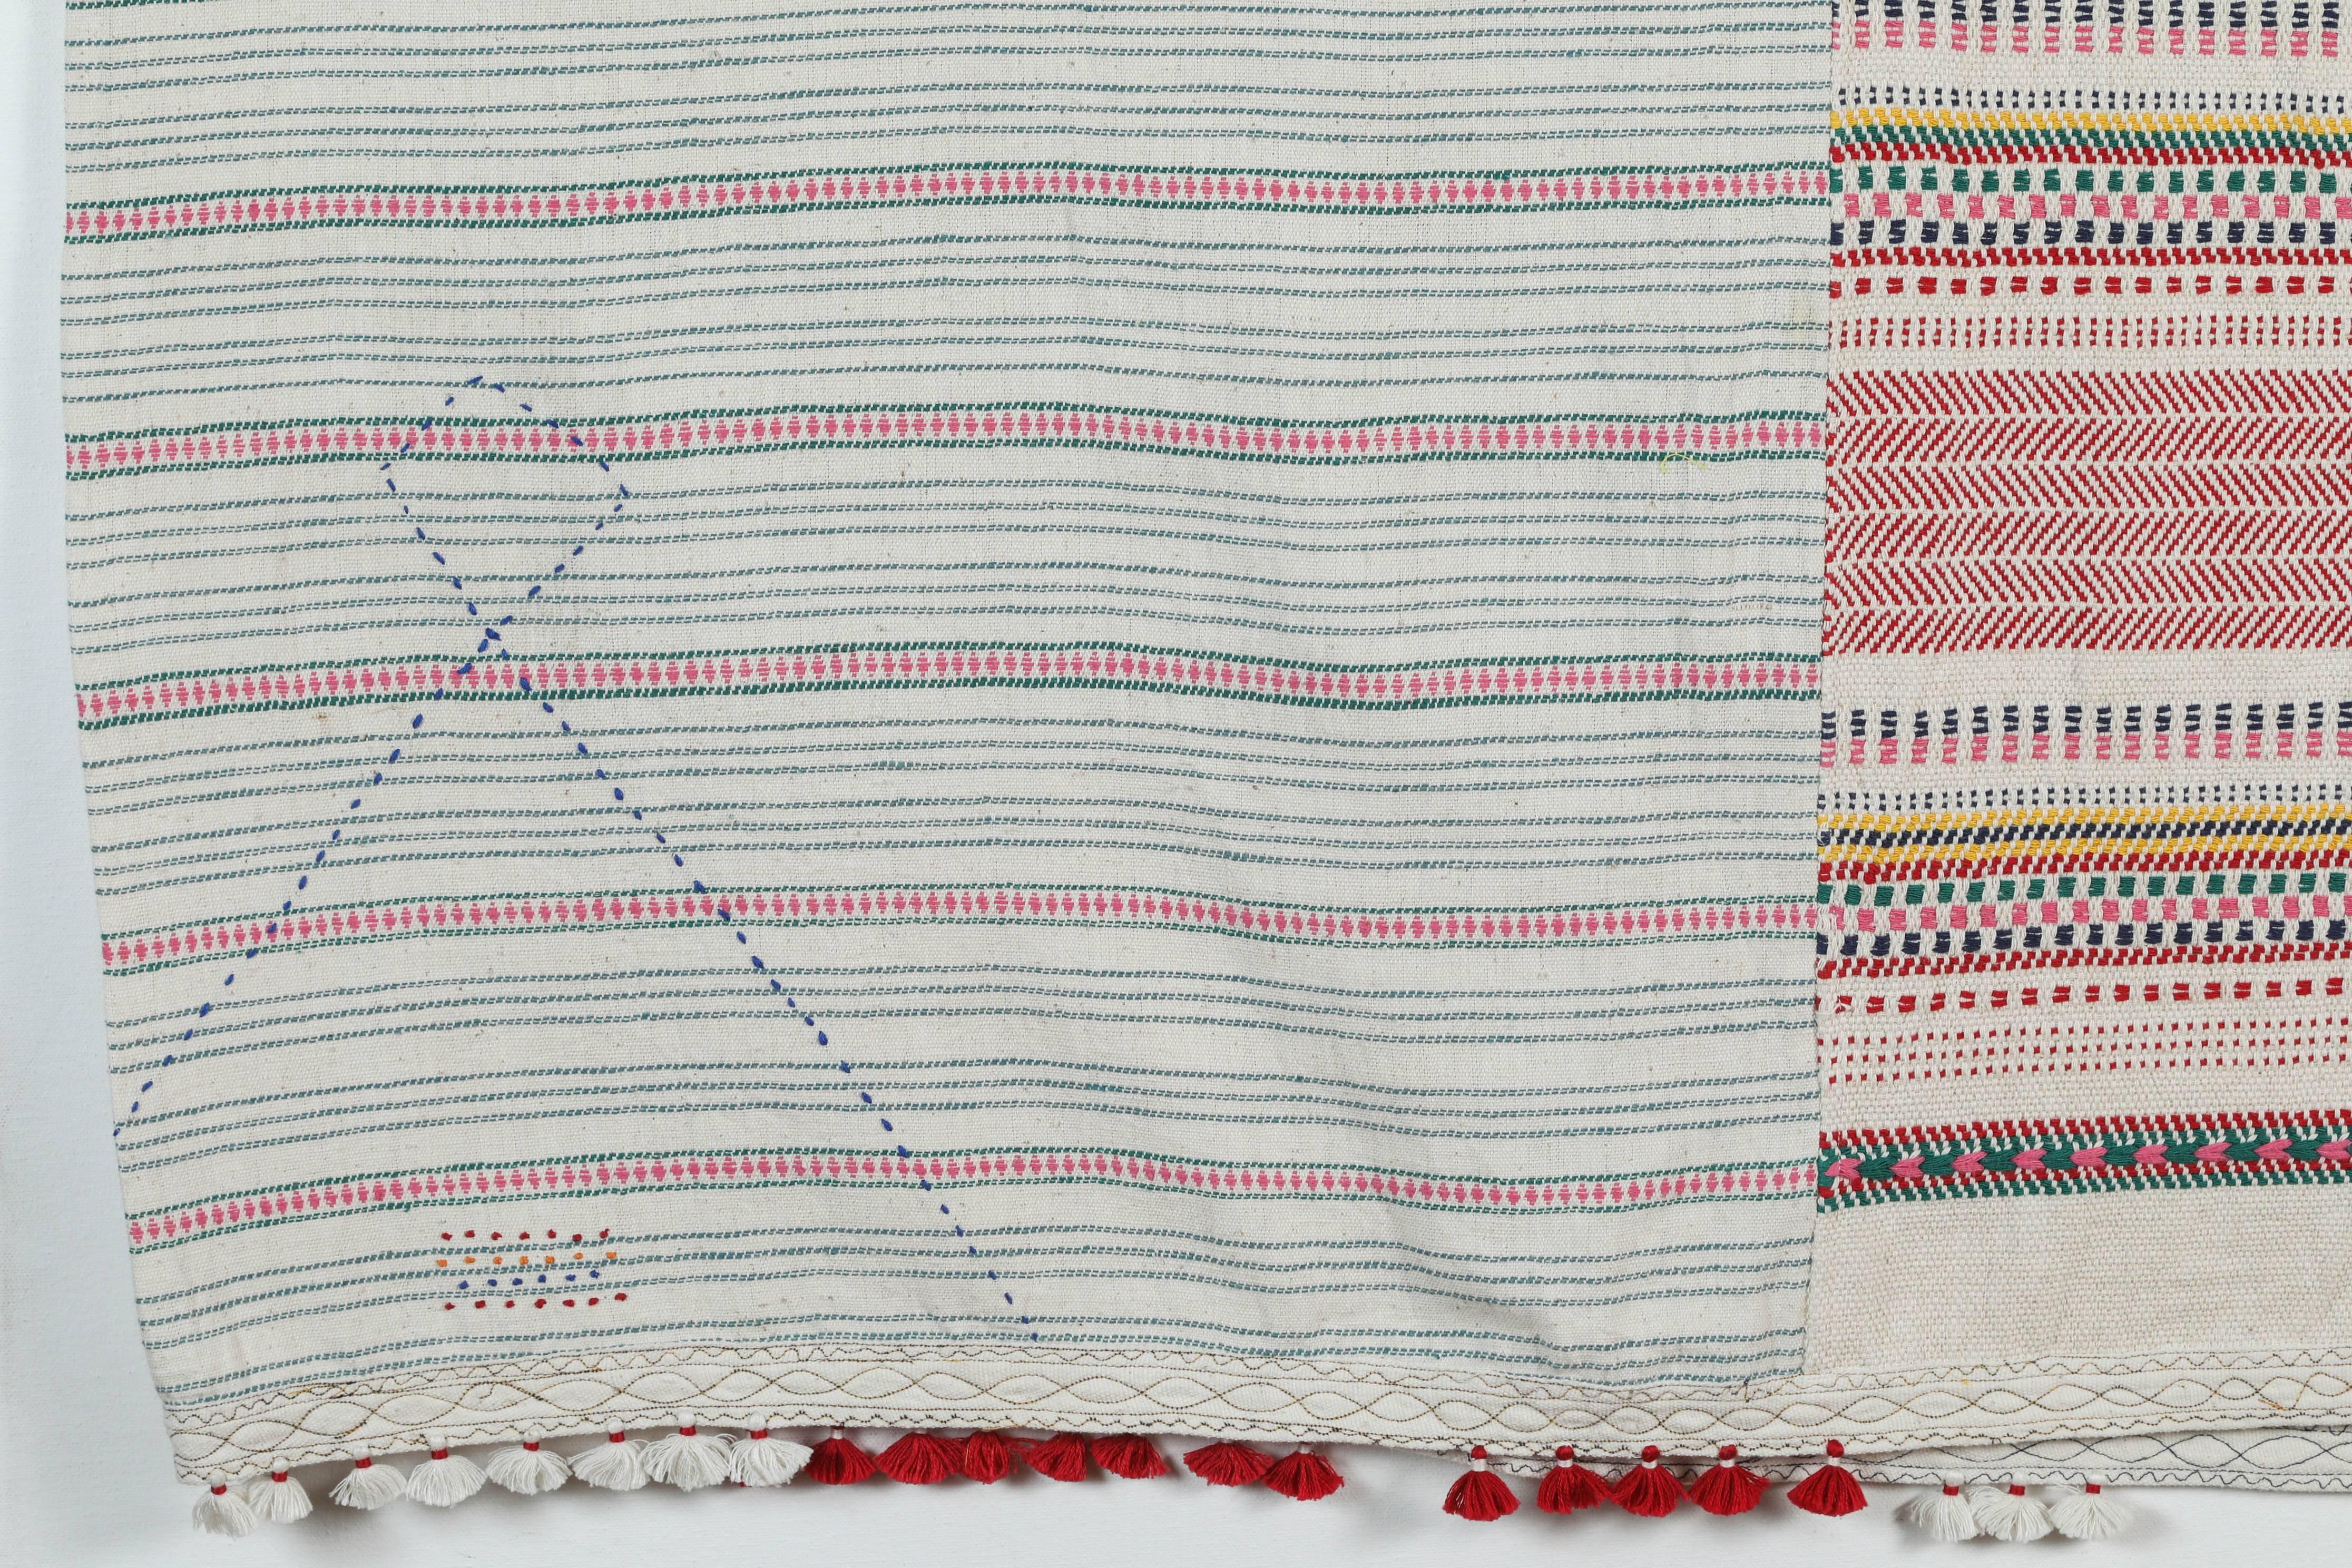 Kala naturally dyed organic cotton from Gujarat, India. Hand-loomed using traditional Indian textile techniques to produce extra weft woven stripes and plaids. This red, ivory, blue, green and yellow bedcover has added hand-knotted tassels and